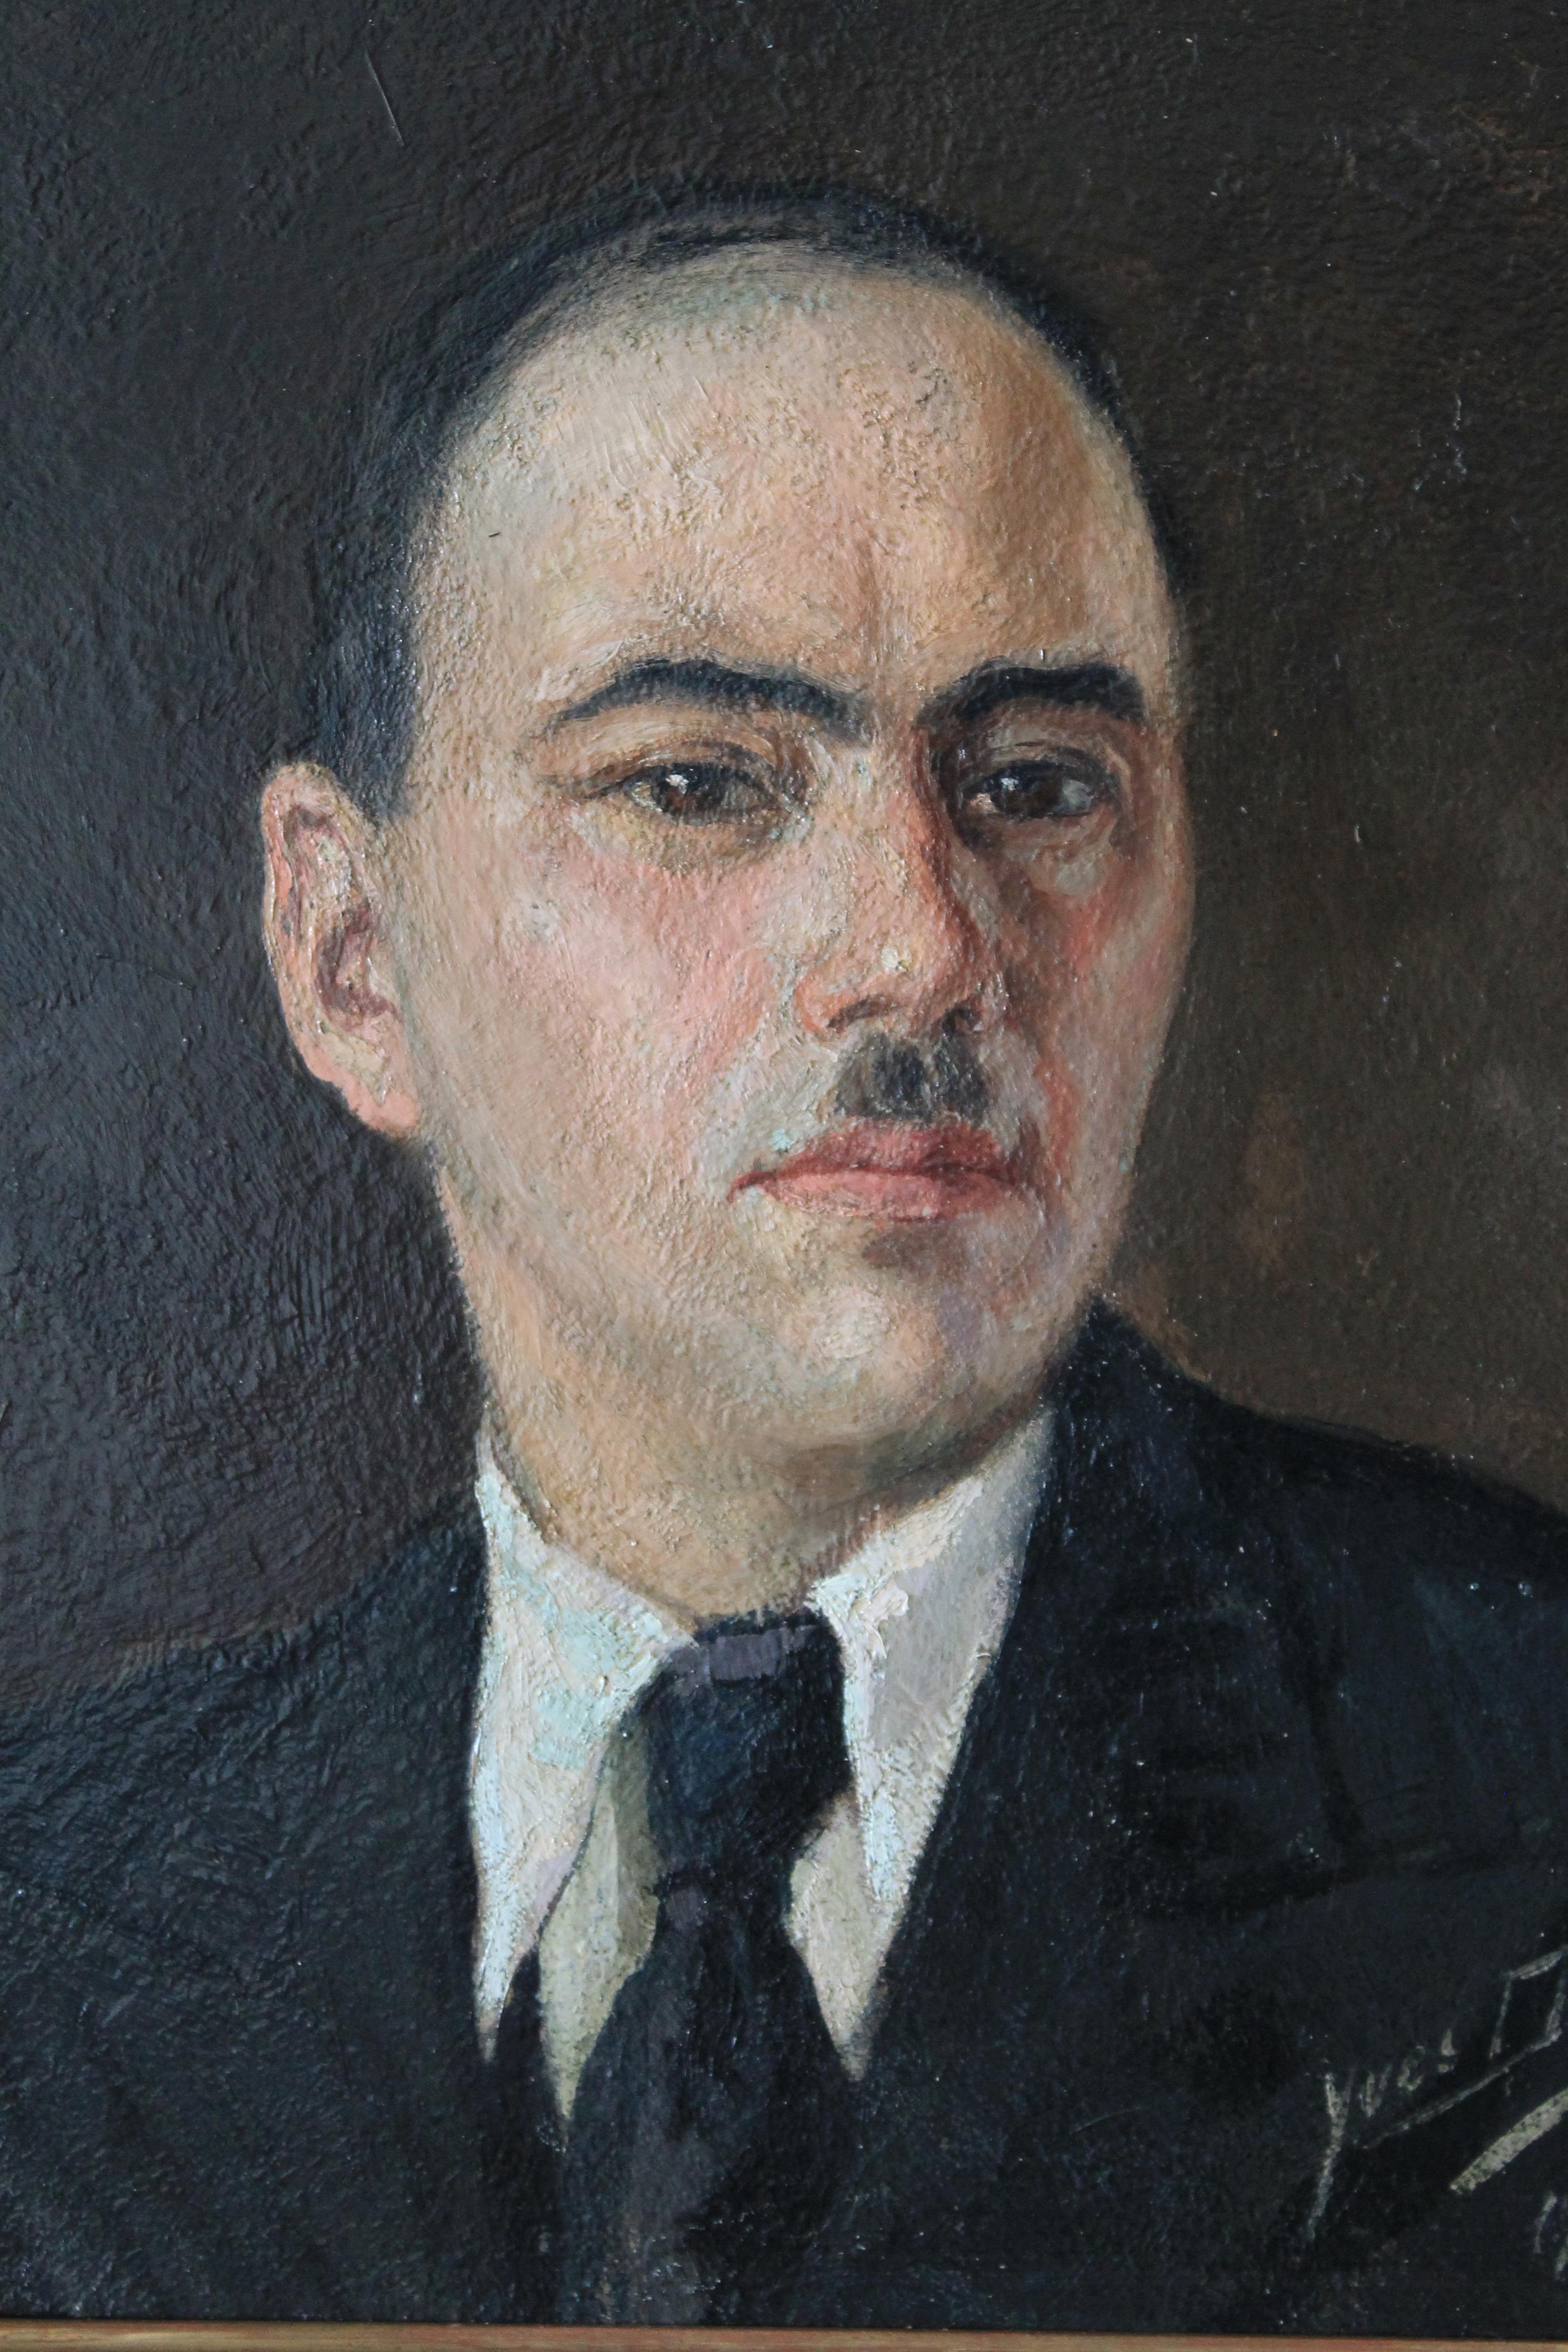 Moody and atmospheric vintage gentleman oil portrait from the 1930's signed and datd by the artist in the lower right corner.  This is a very appealing oil portrait of a man with a slightly hauty appearance.  It's on hardboard and very well painted